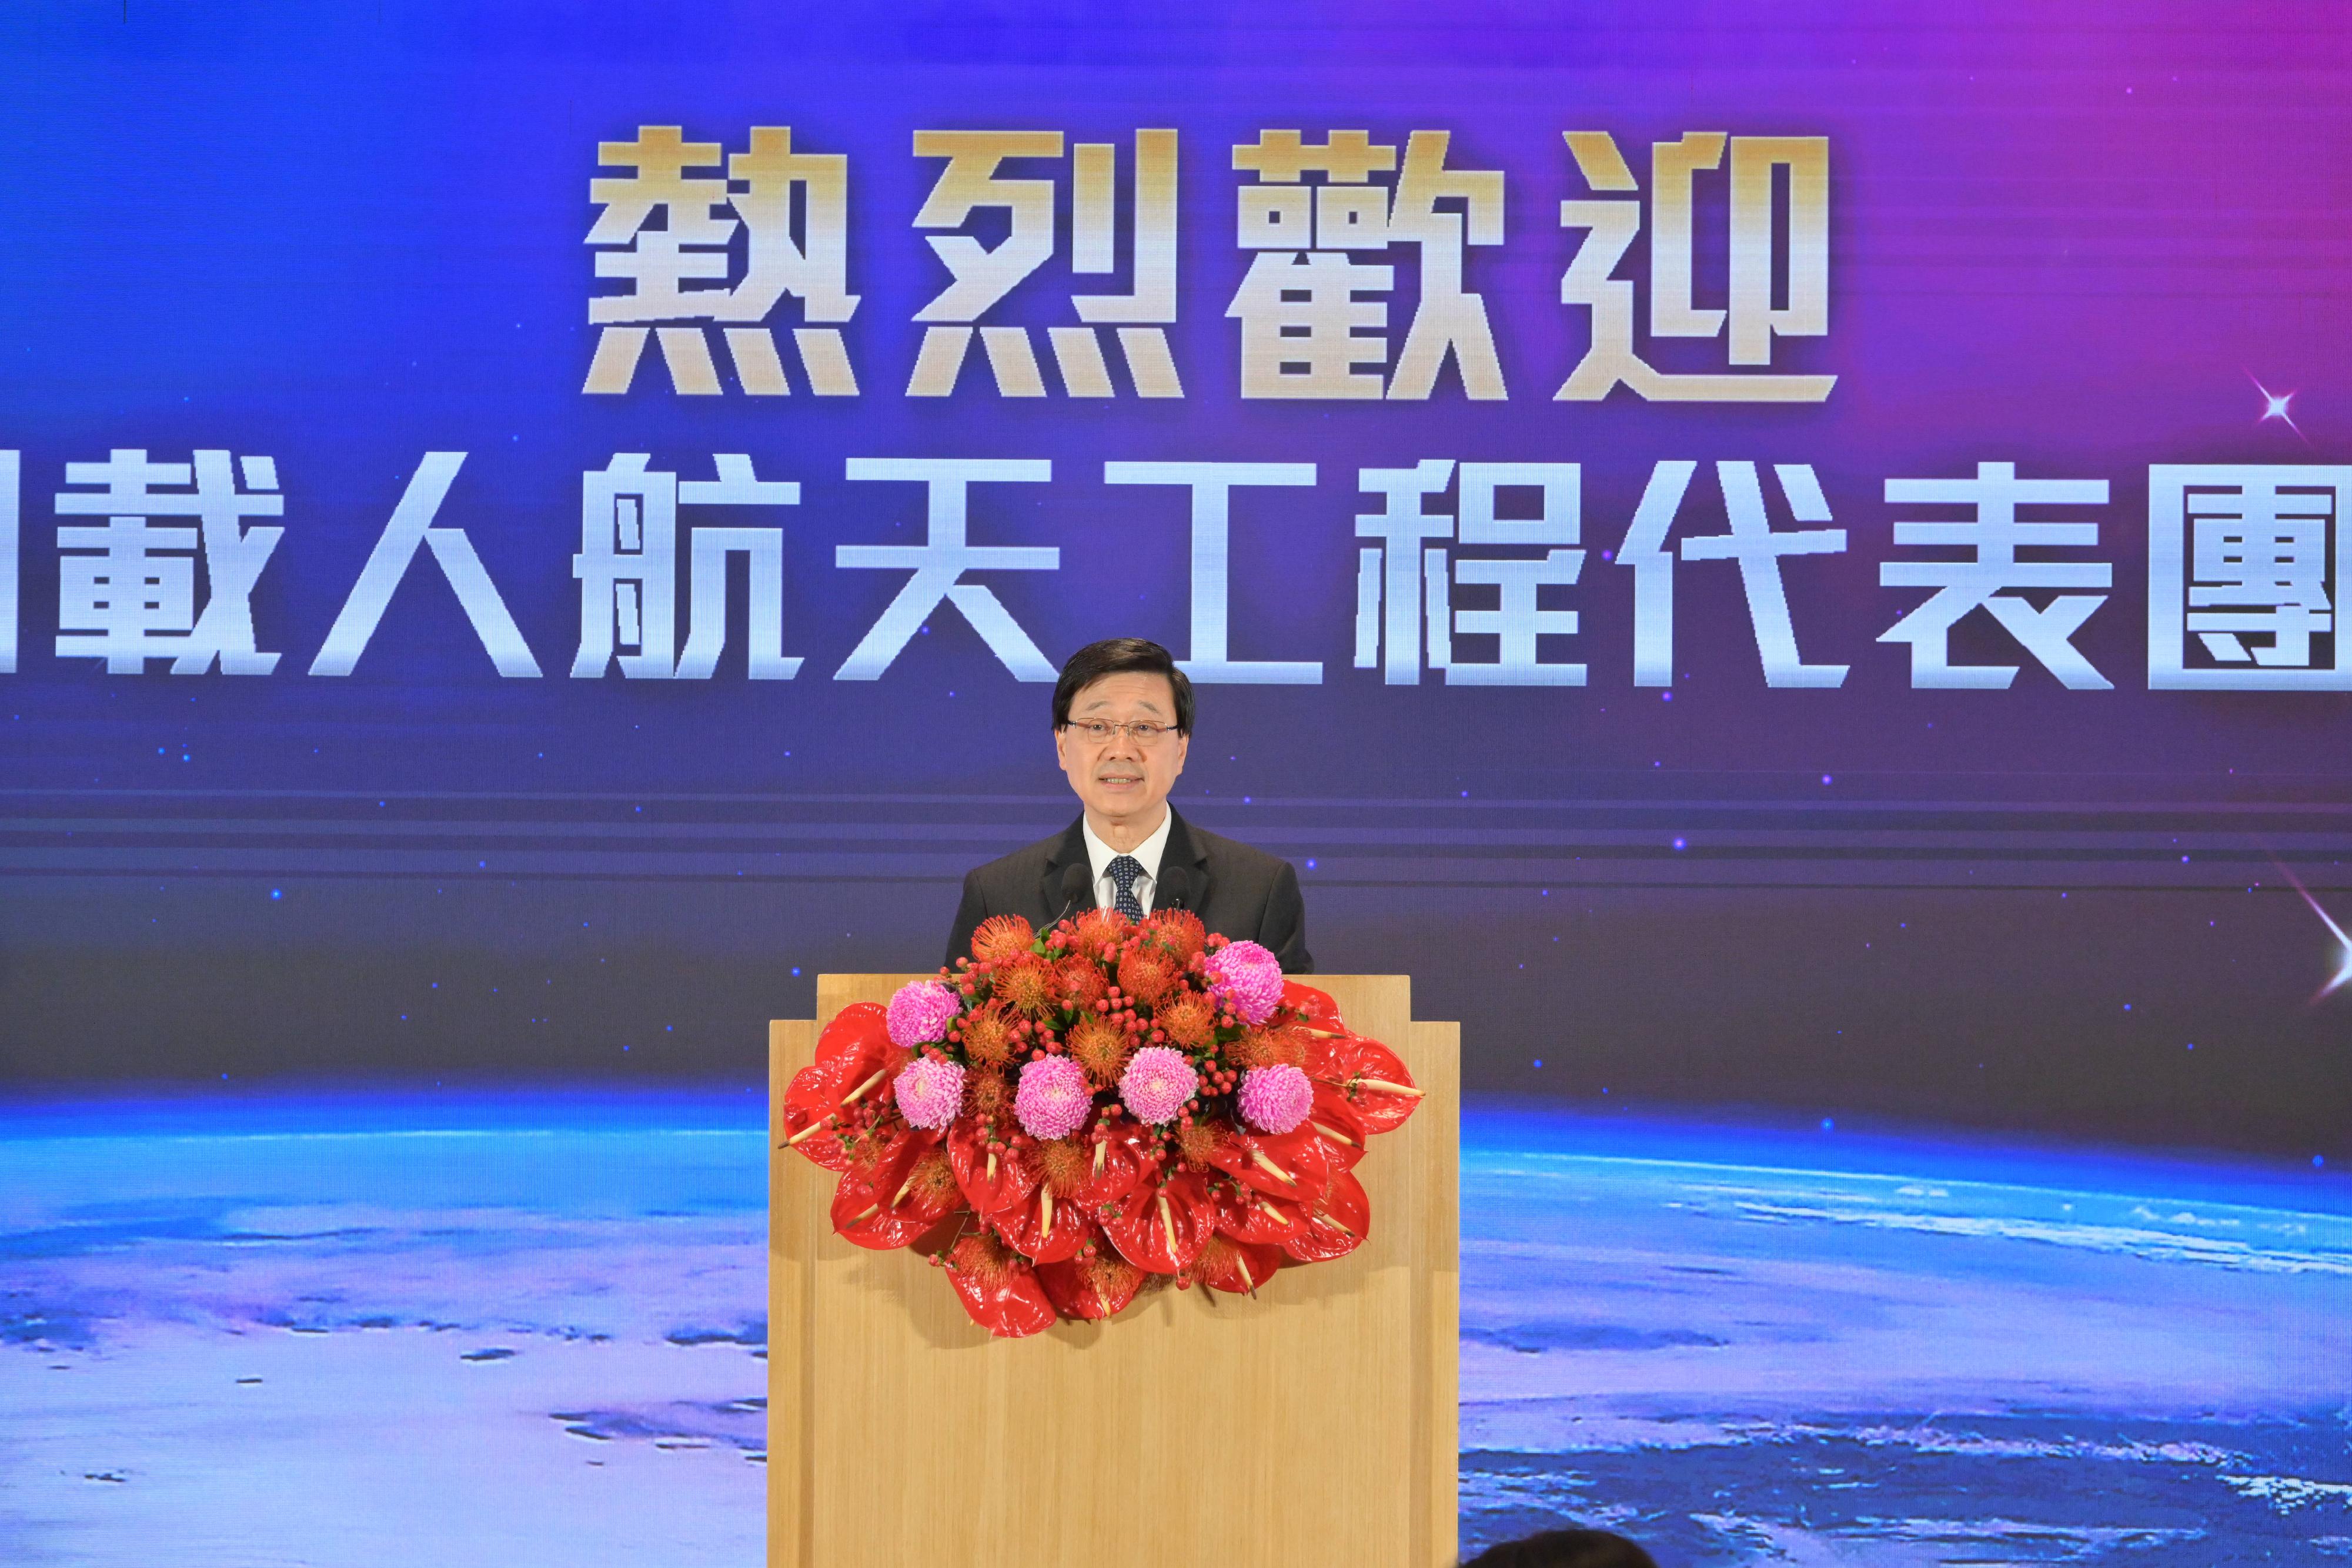 A China Manned Space delegation arrived in Hong Kong for a four-day visit today (November 28). Photo shows the Chief Executive, Mr John Lee, delivering a speech at the welcome banquet.